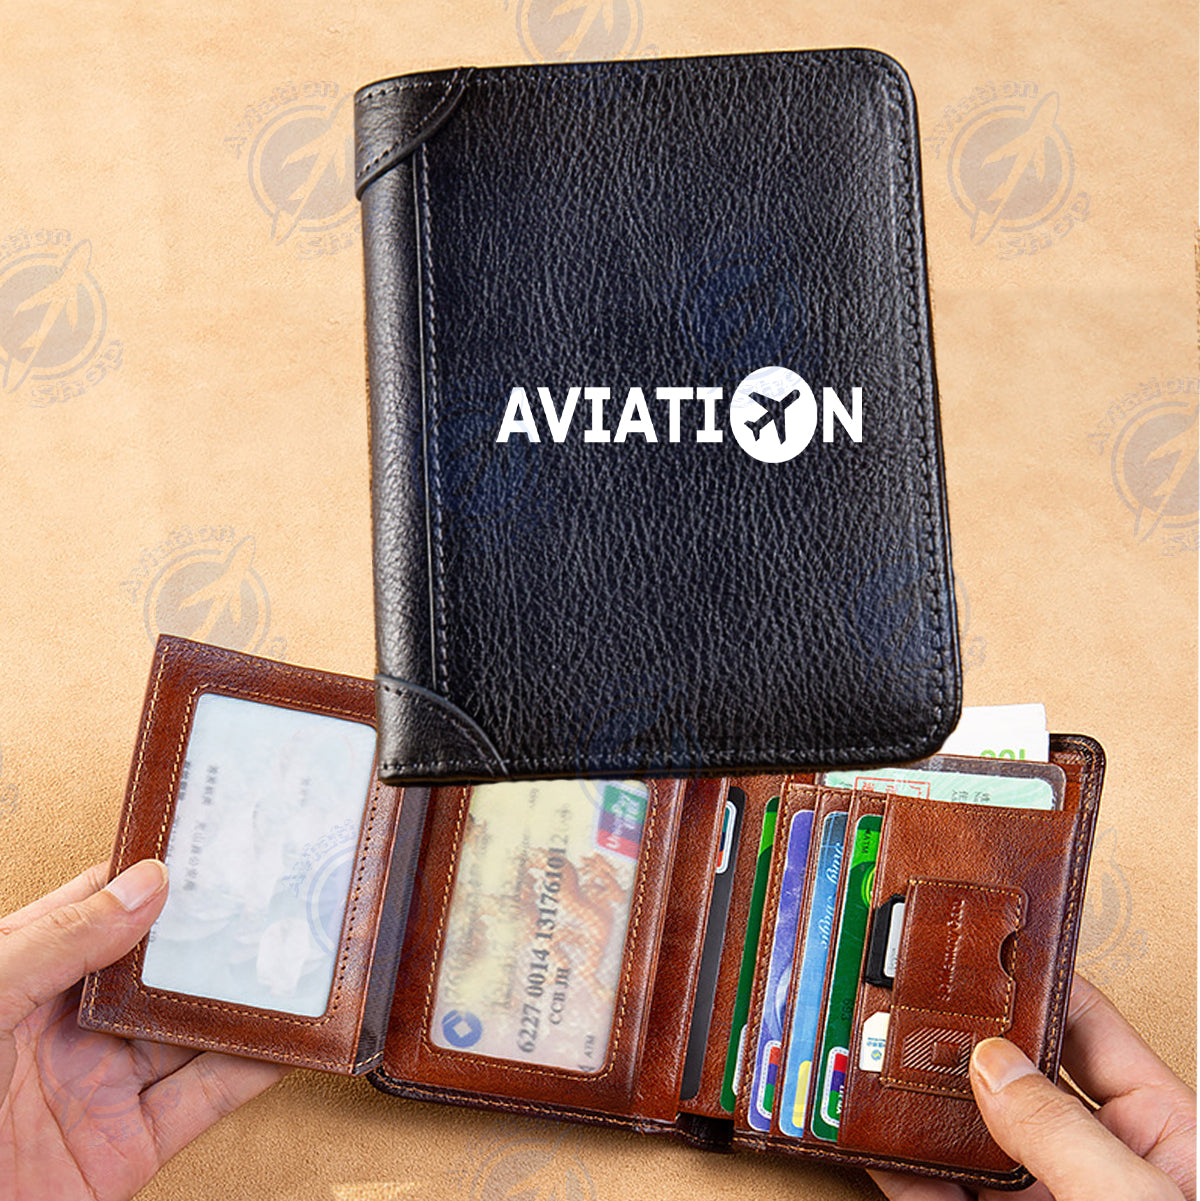 Aviation Designed Leather Wallets